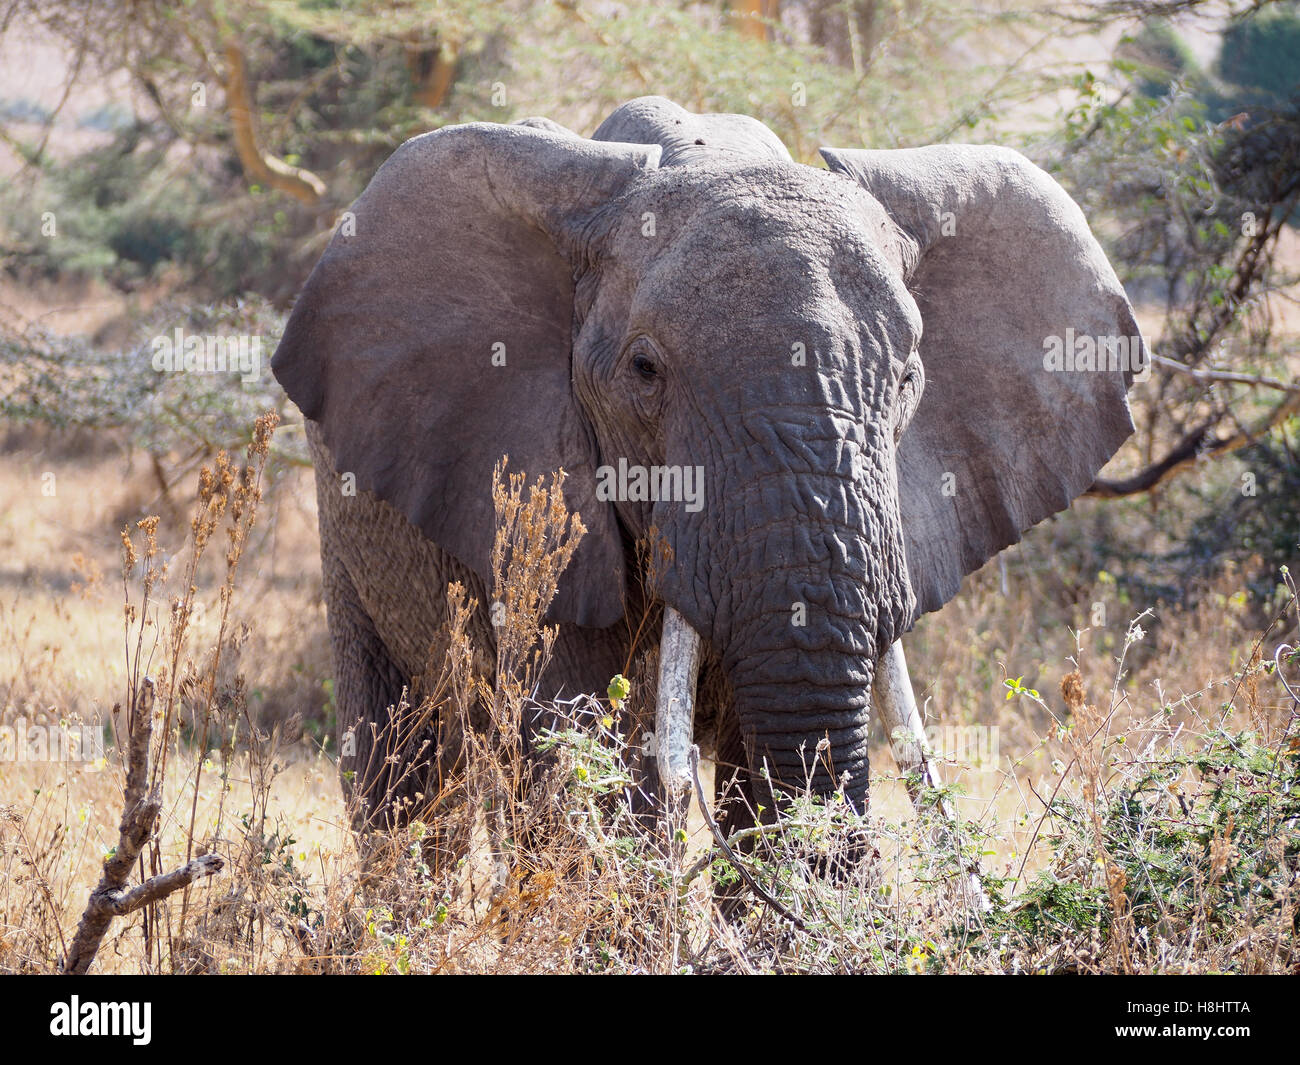 Close-up front view of an elephant Stock Photo